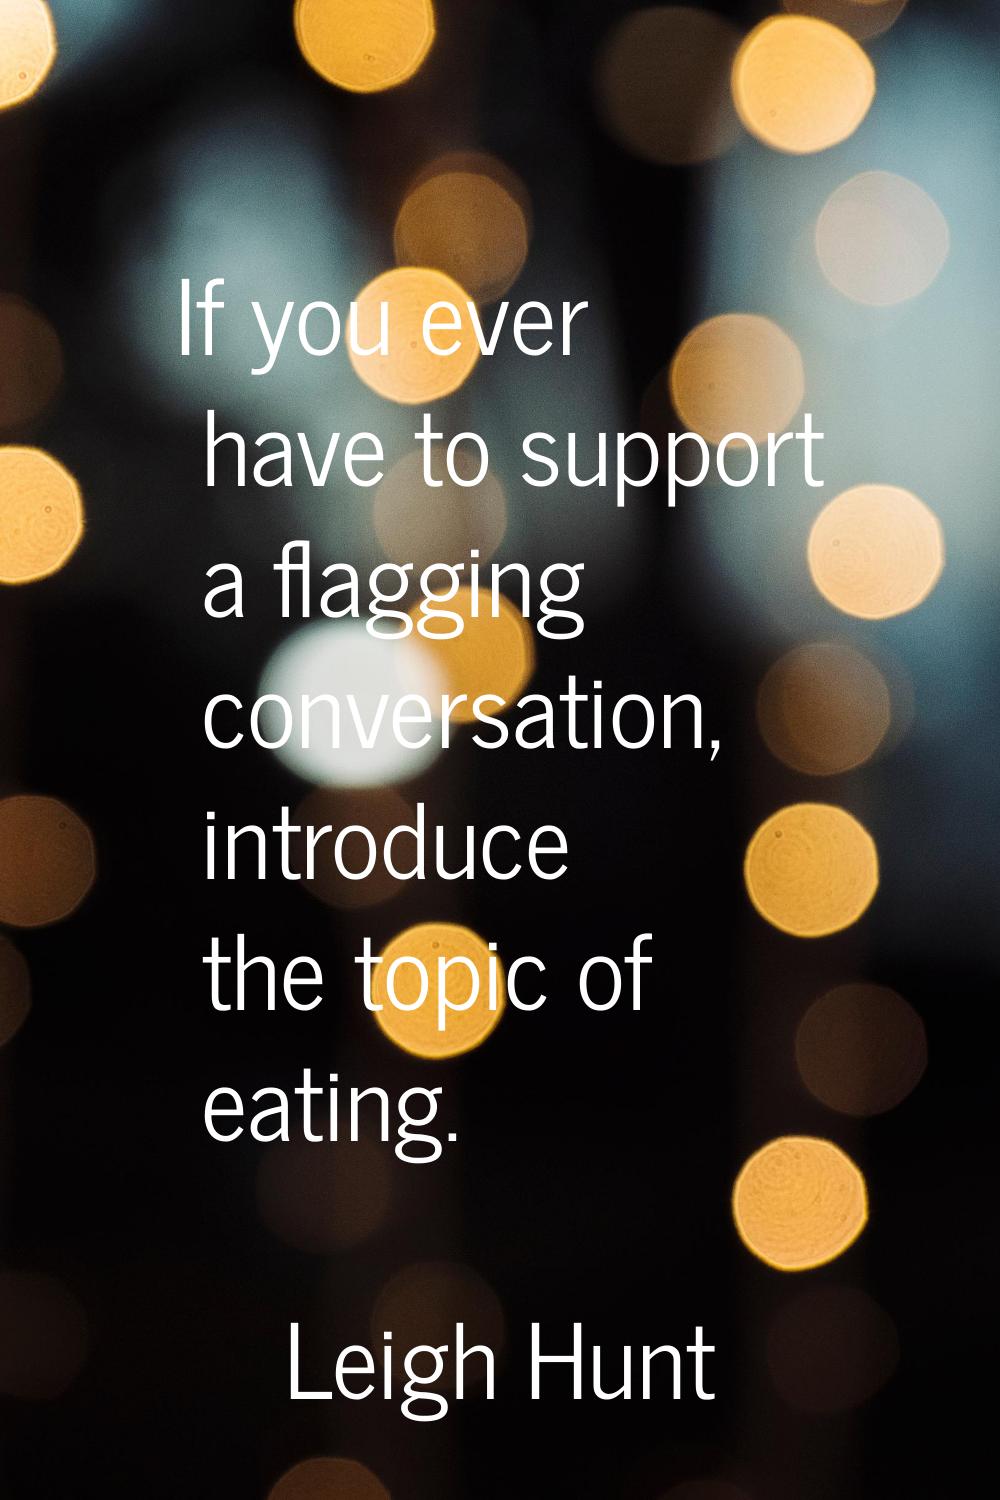 If you ever have to support a flagging conversation, introduce the topic of eating.